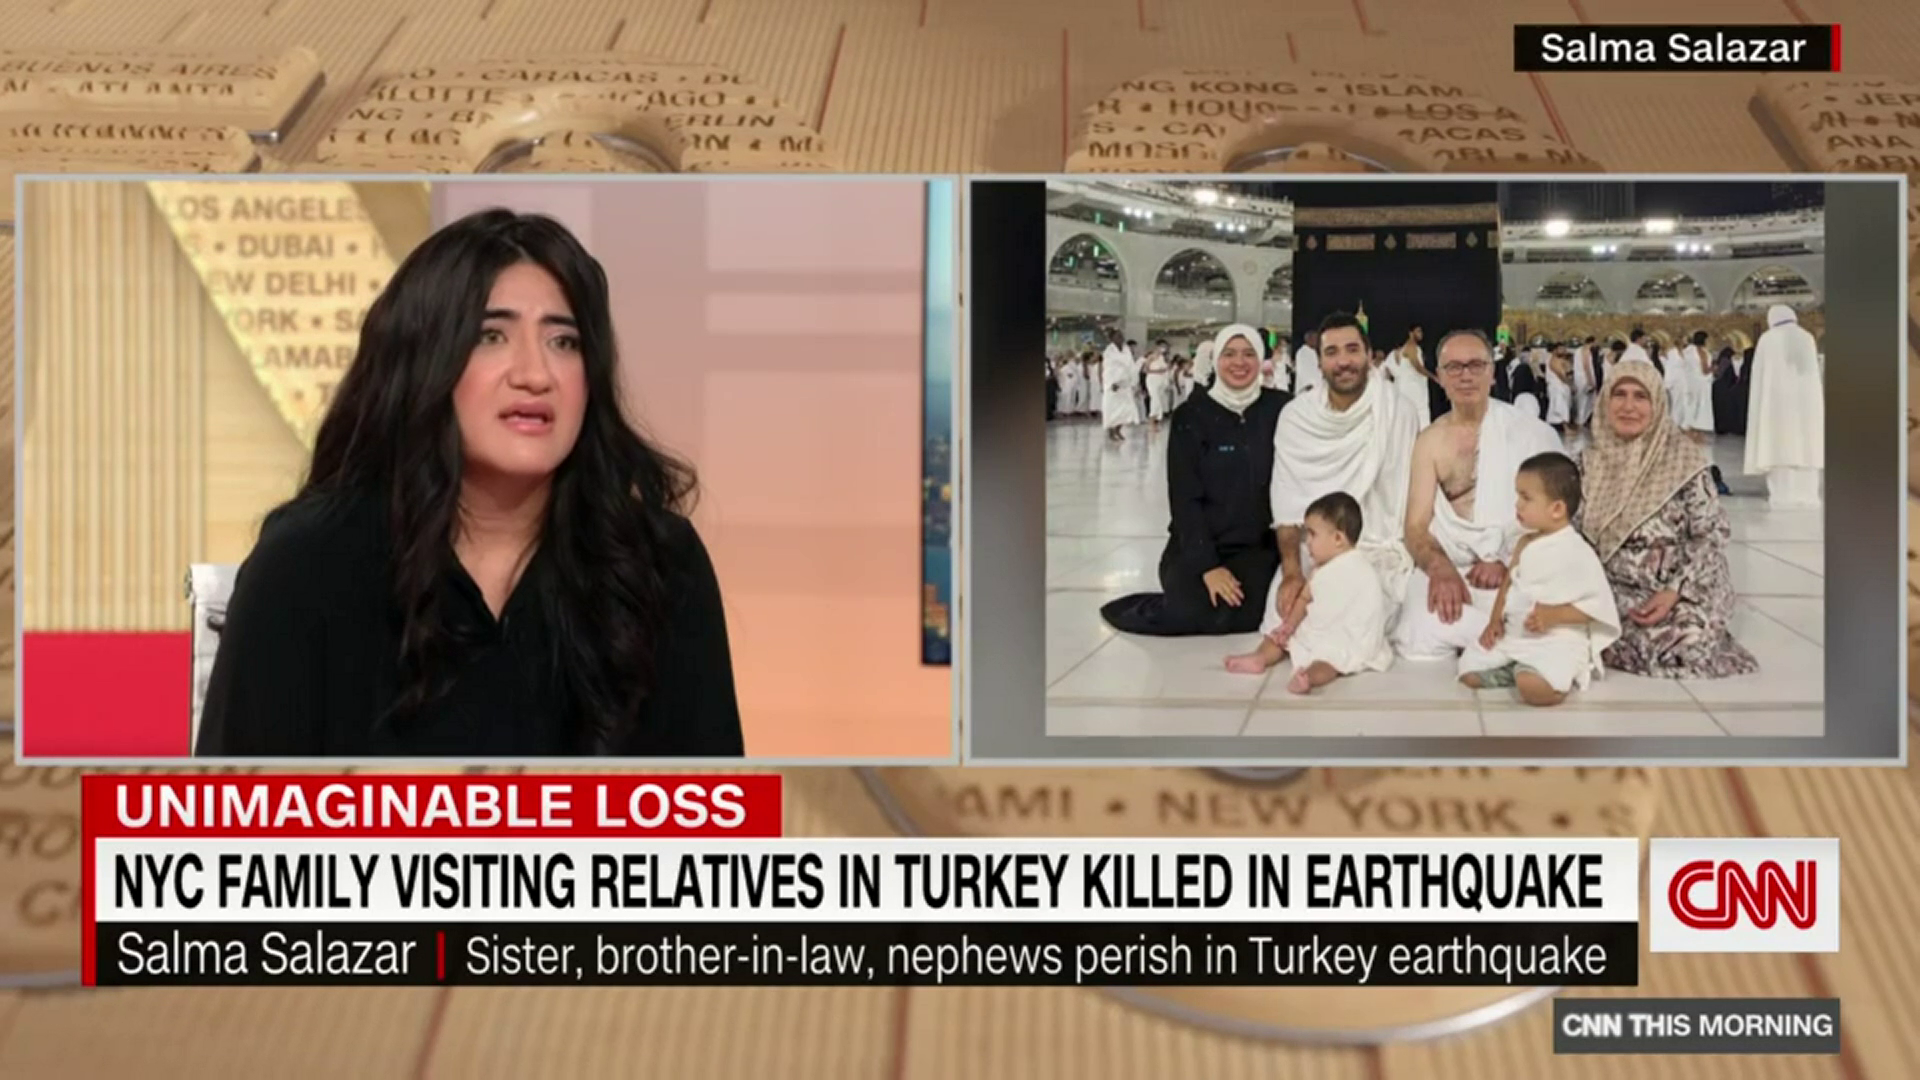 “Our hearts are broken”: Woman speaks to CNN about NYC family who was killed in Turkey earthquake 